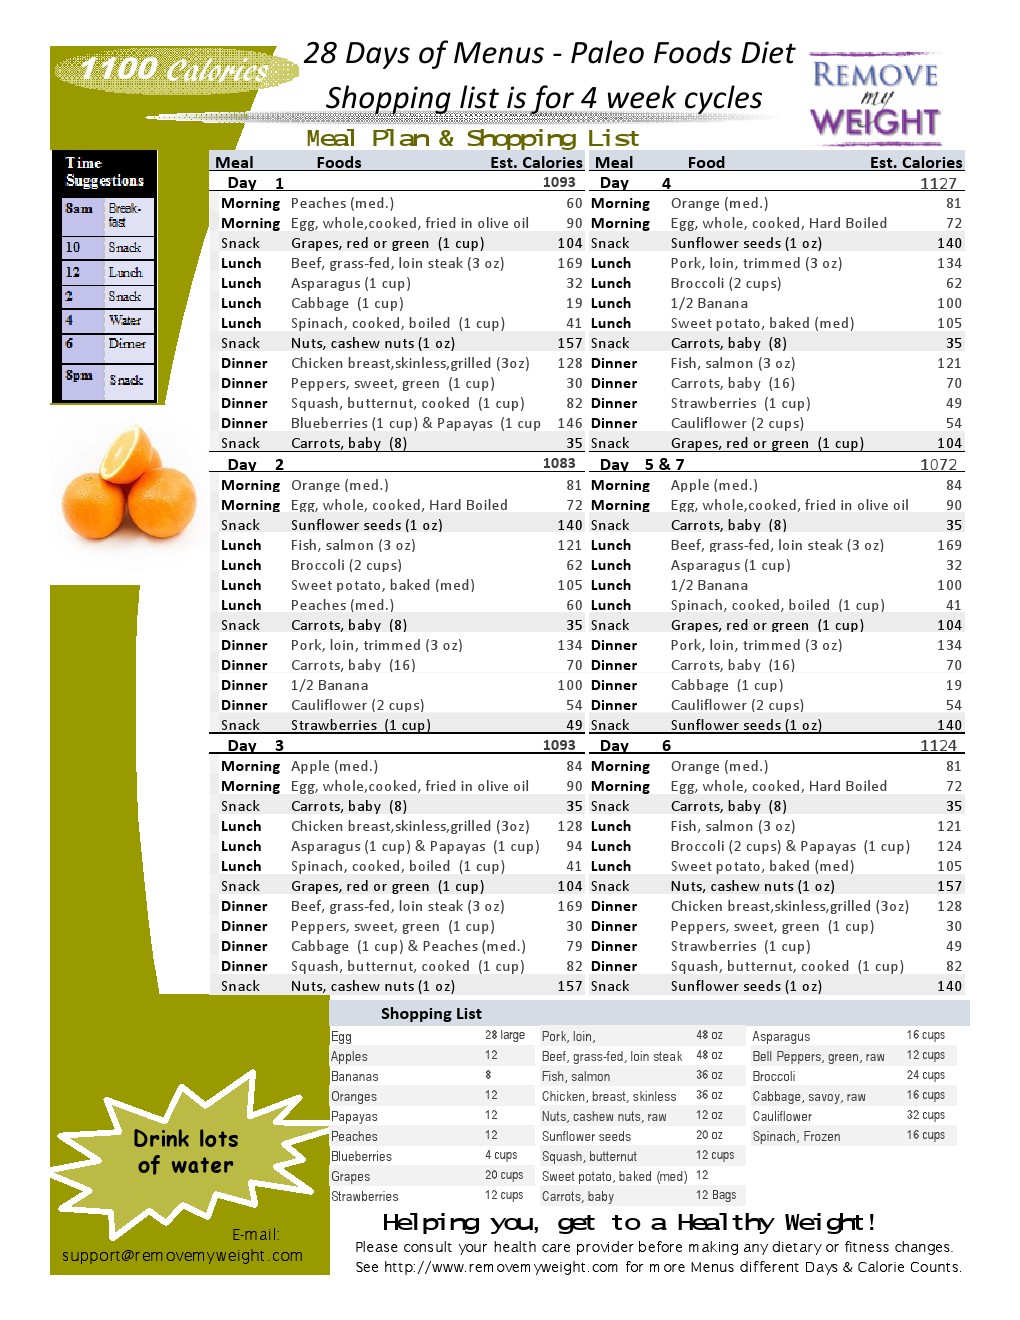 free-1100-calories-a-day-28-day-paleo-diet-with-shopping-list